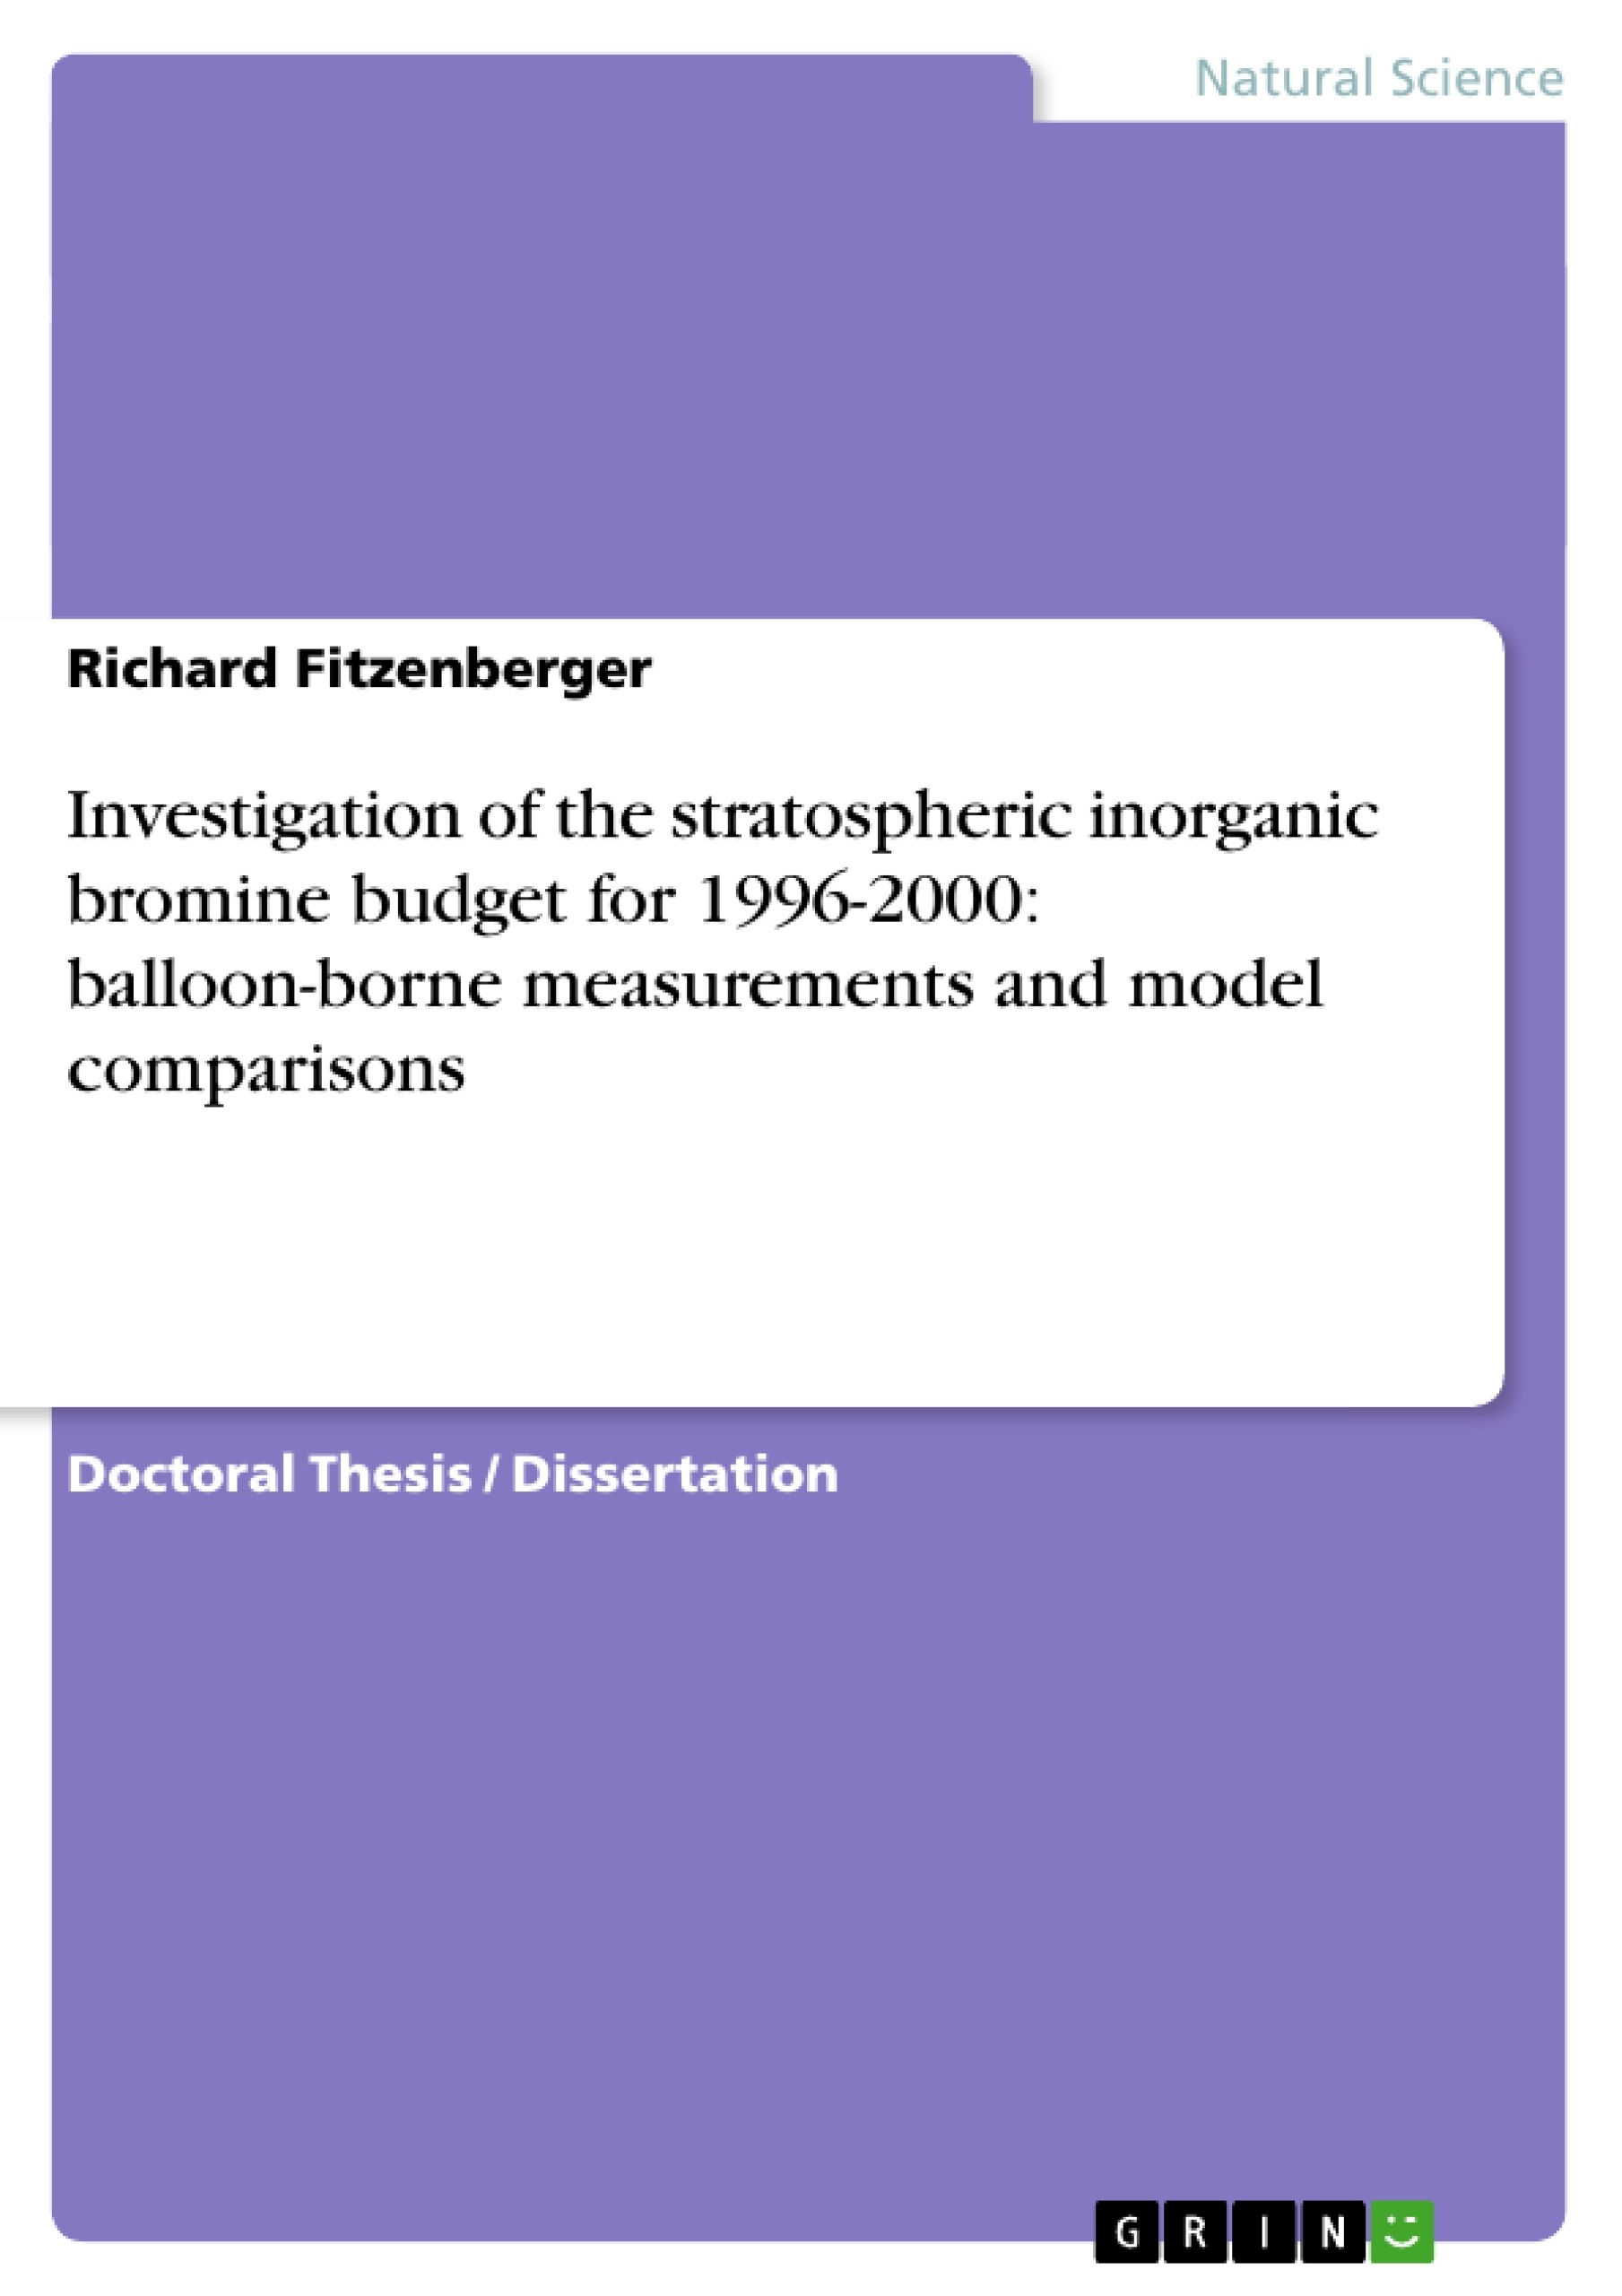 Título: Investigation of the stratospheric inorganic bromine budget for 1996-2000: balloon-borne measurements and model comparisons